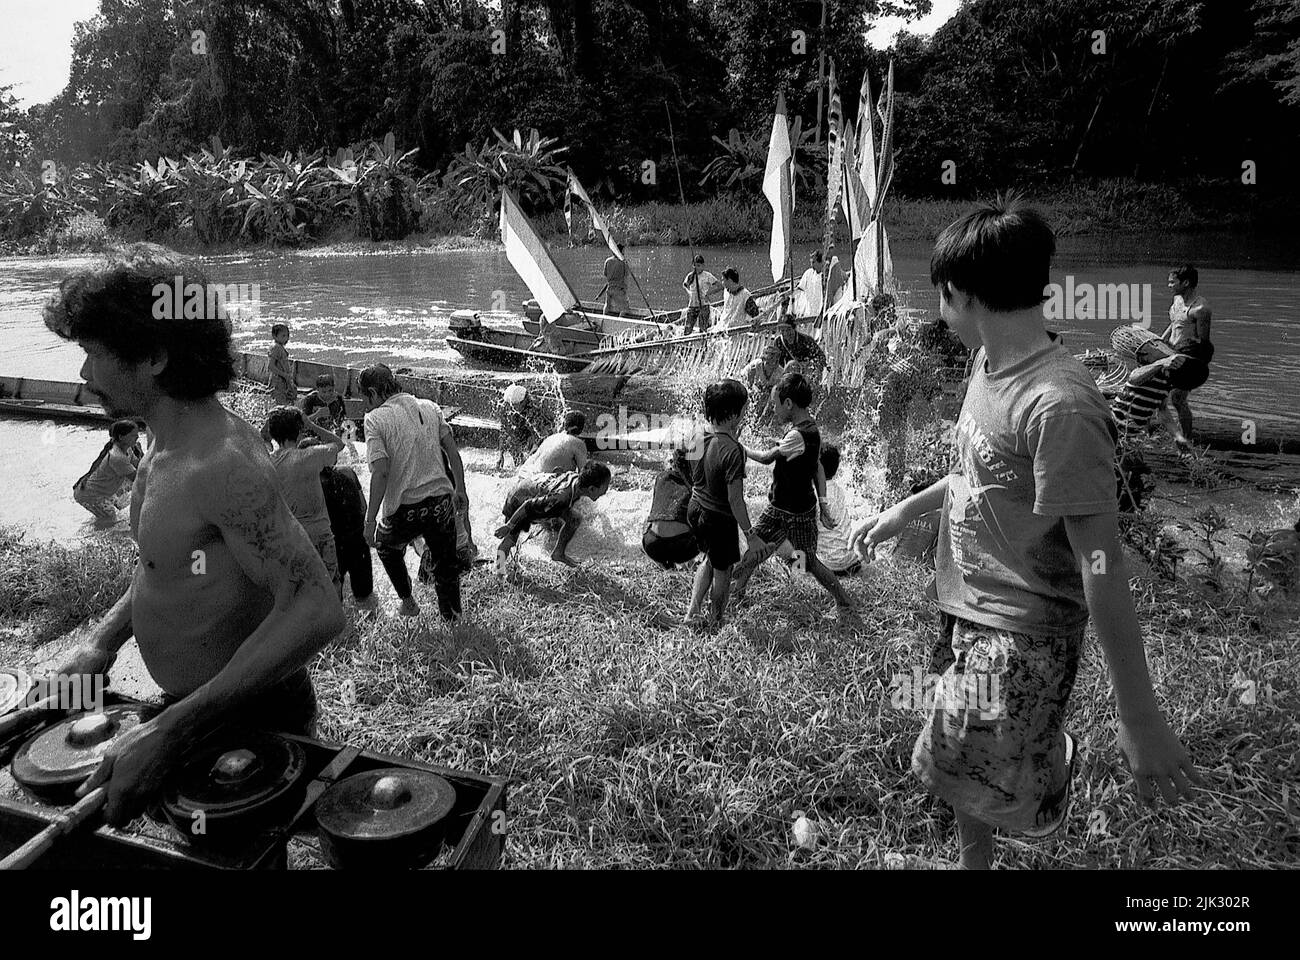 Uluk Palin village, Embaloh Hilir, Kapuas Hulu, West Kalimantan, Indonesia. March 2007. A man unloading a set of gamelan percussive instrument walking pass a crowd of people--Dayak Tamambaloh community--who splash water at each others as a purifying act, in front of a boat that just carried the family of the new traditional chief for a visit to a nearby cemetery where their former chief is buried. This is a part of a series of traditional events held to honour the former traditional chief, who passed away several weeks earlier.--Photographed on black and white film, scanned, digitalized. Stock Photo